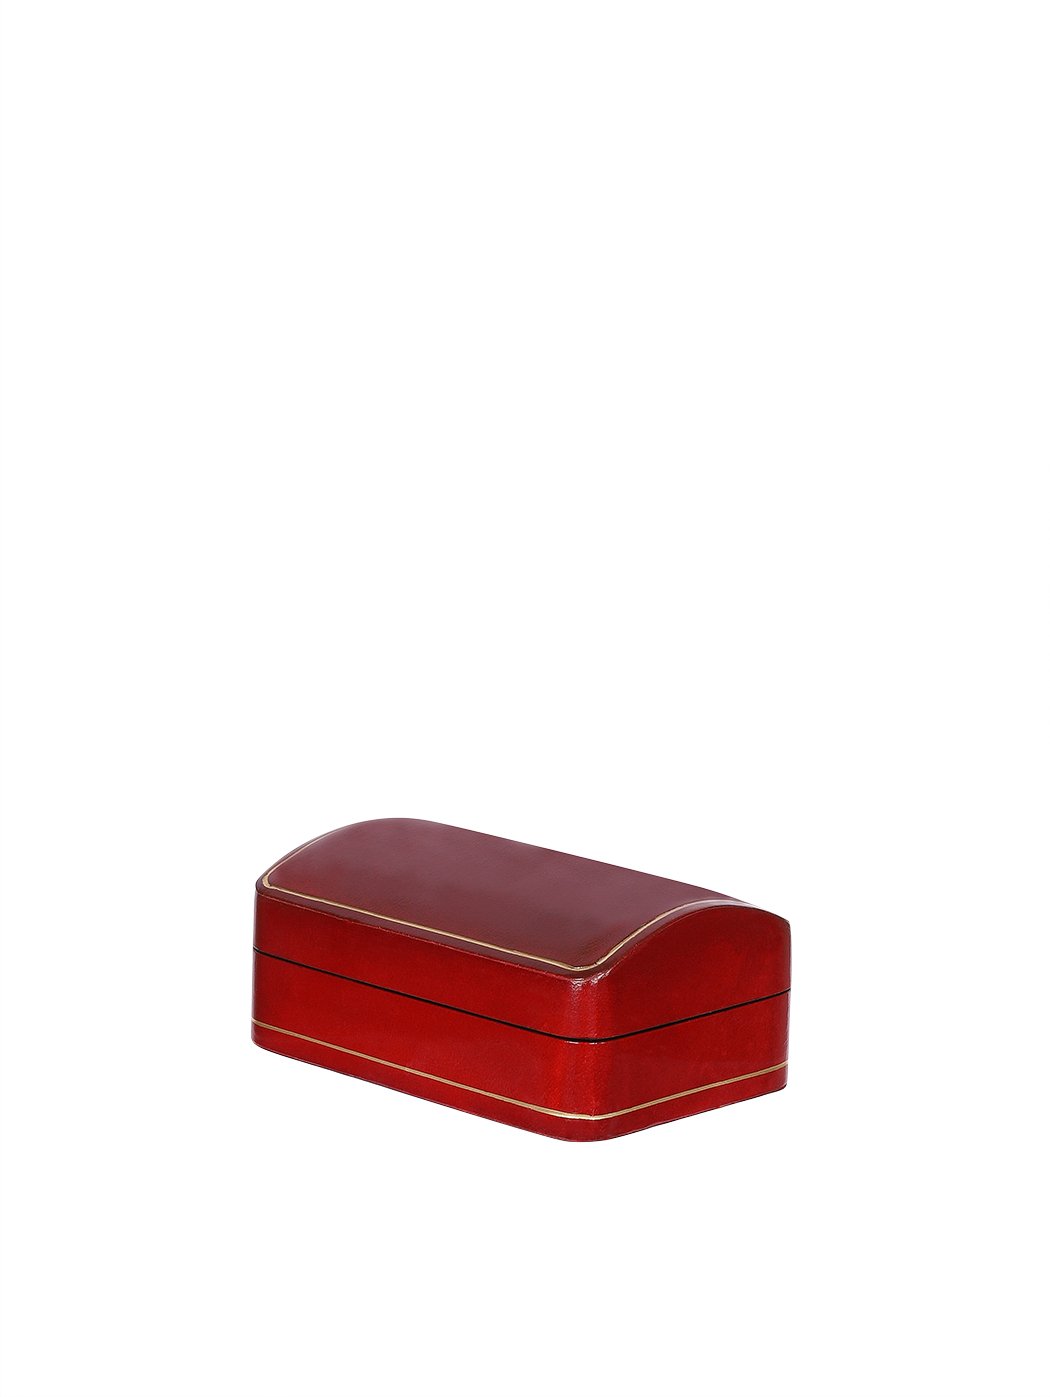 Small Decorative Box Molded Leather Red